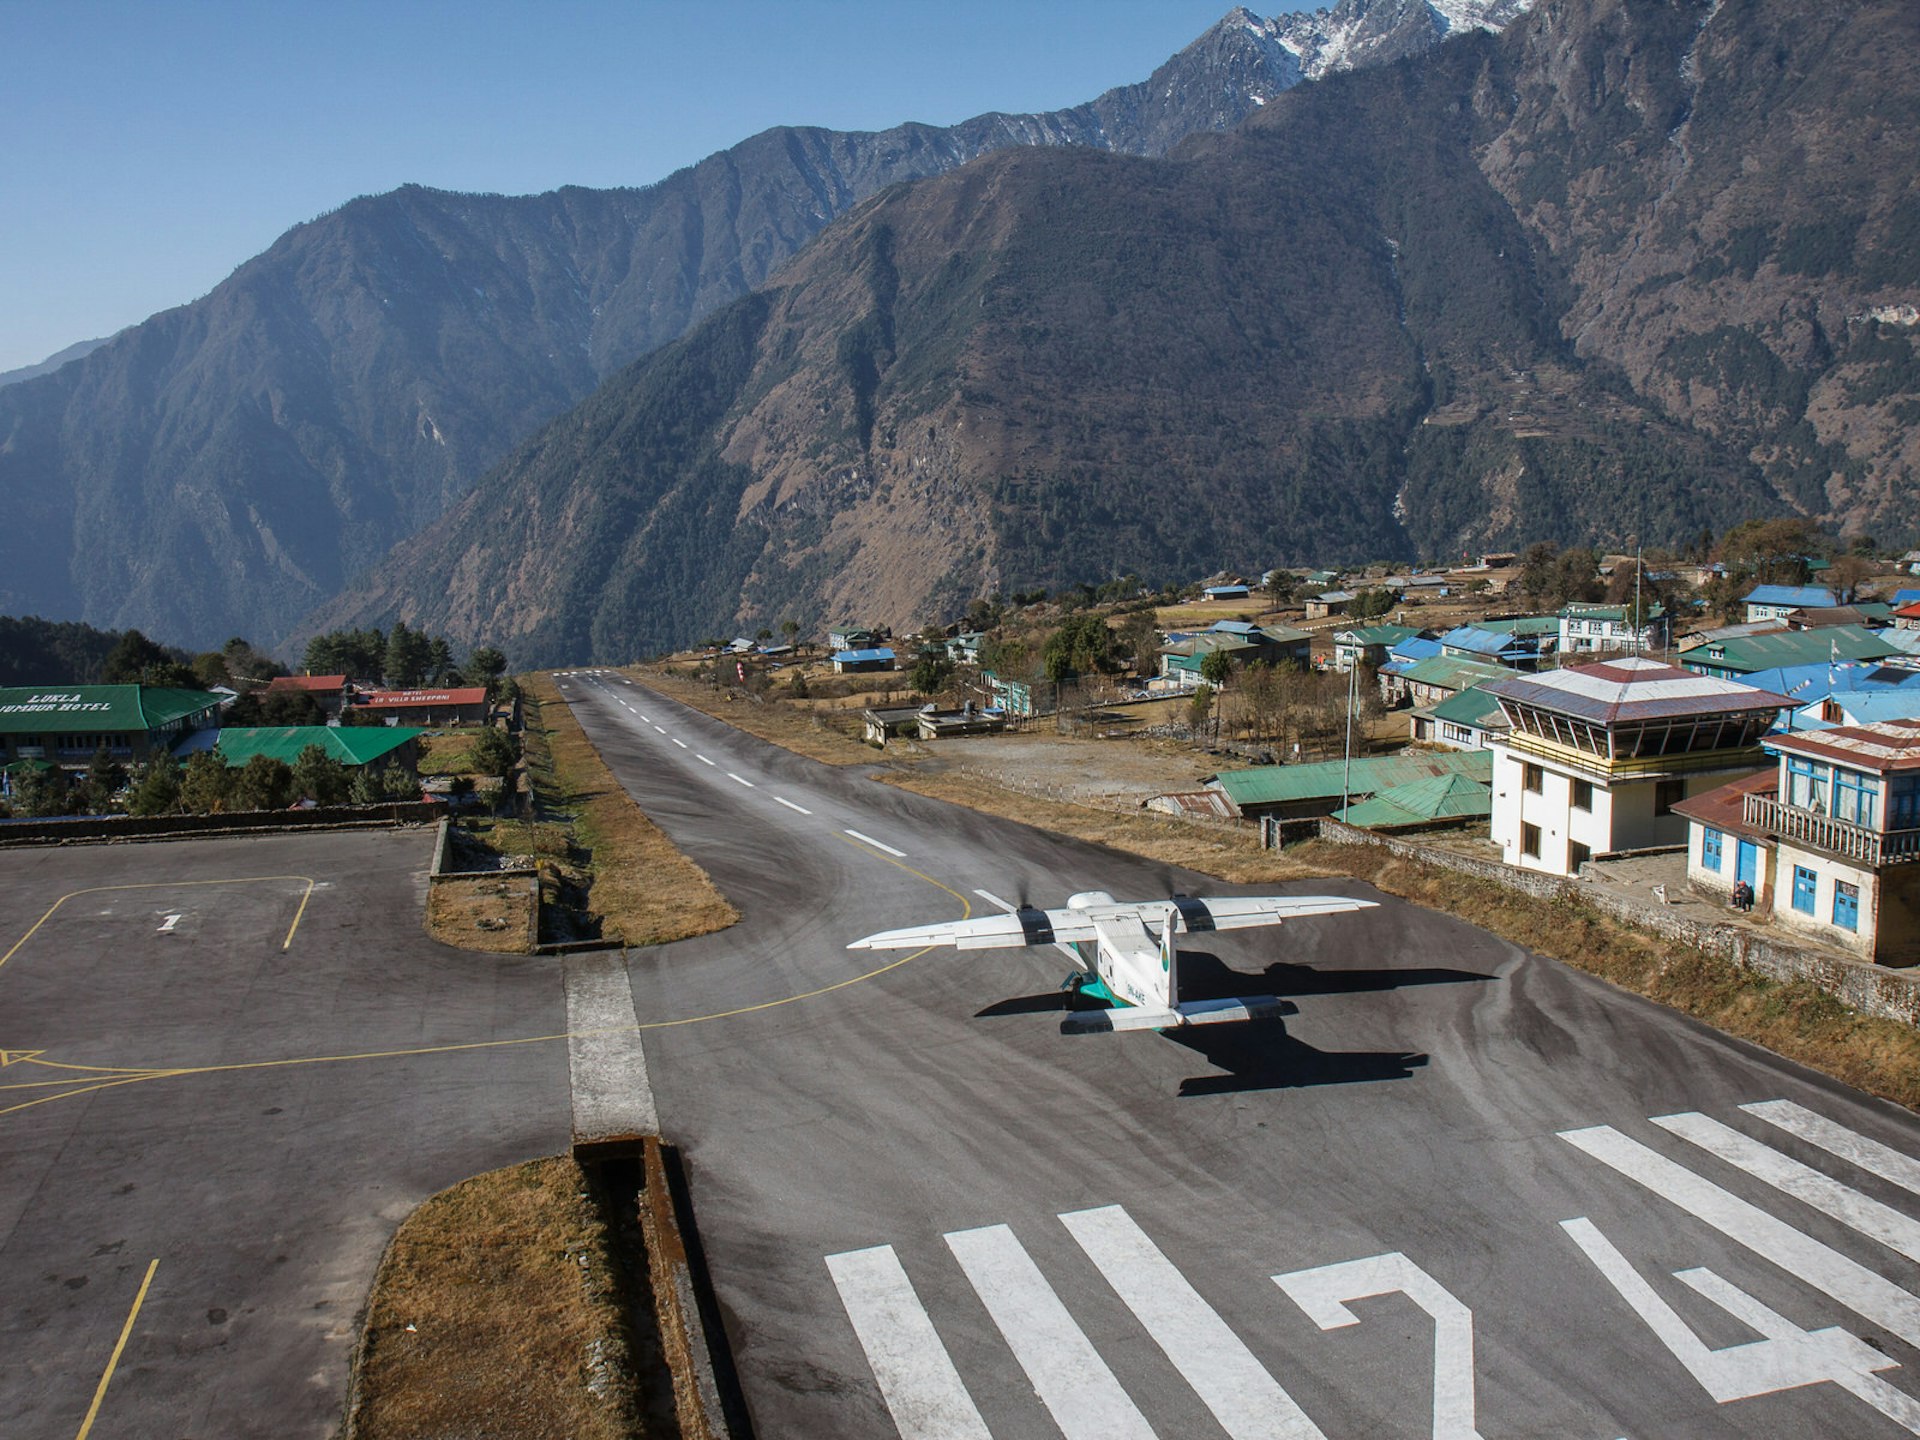 Departing from Lukla's miniature airport © Indrik myneur / CC by 2.0